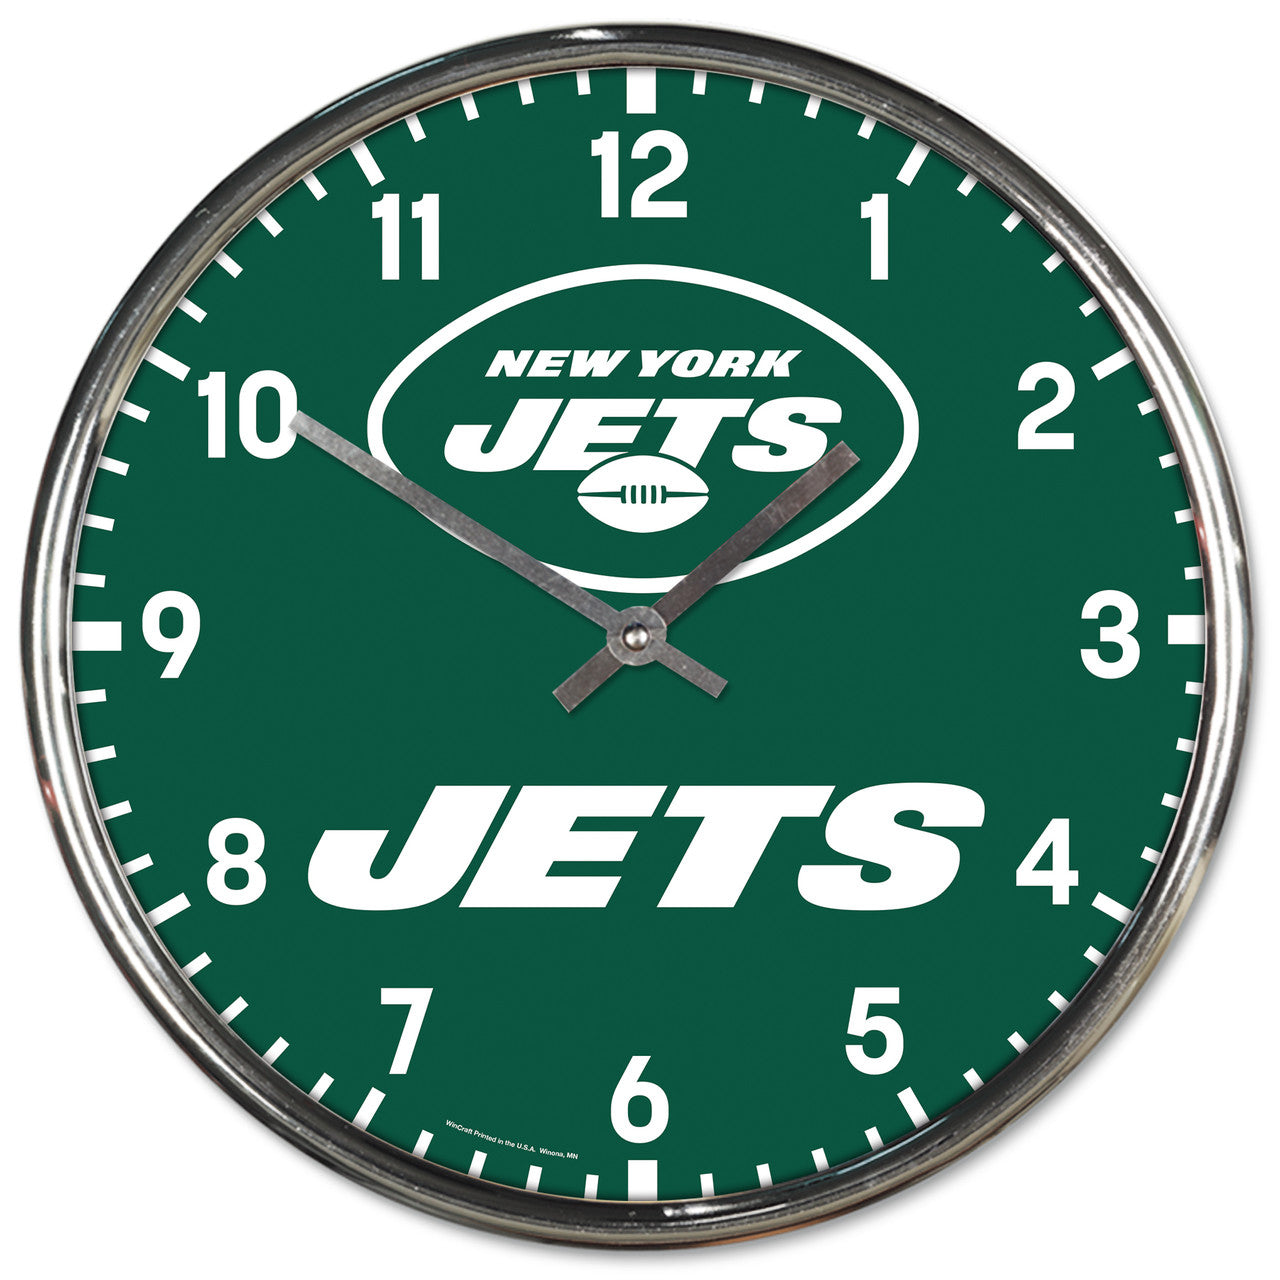 New York Jets 12" Round Wall Chrome Wall Clock by Wincraft